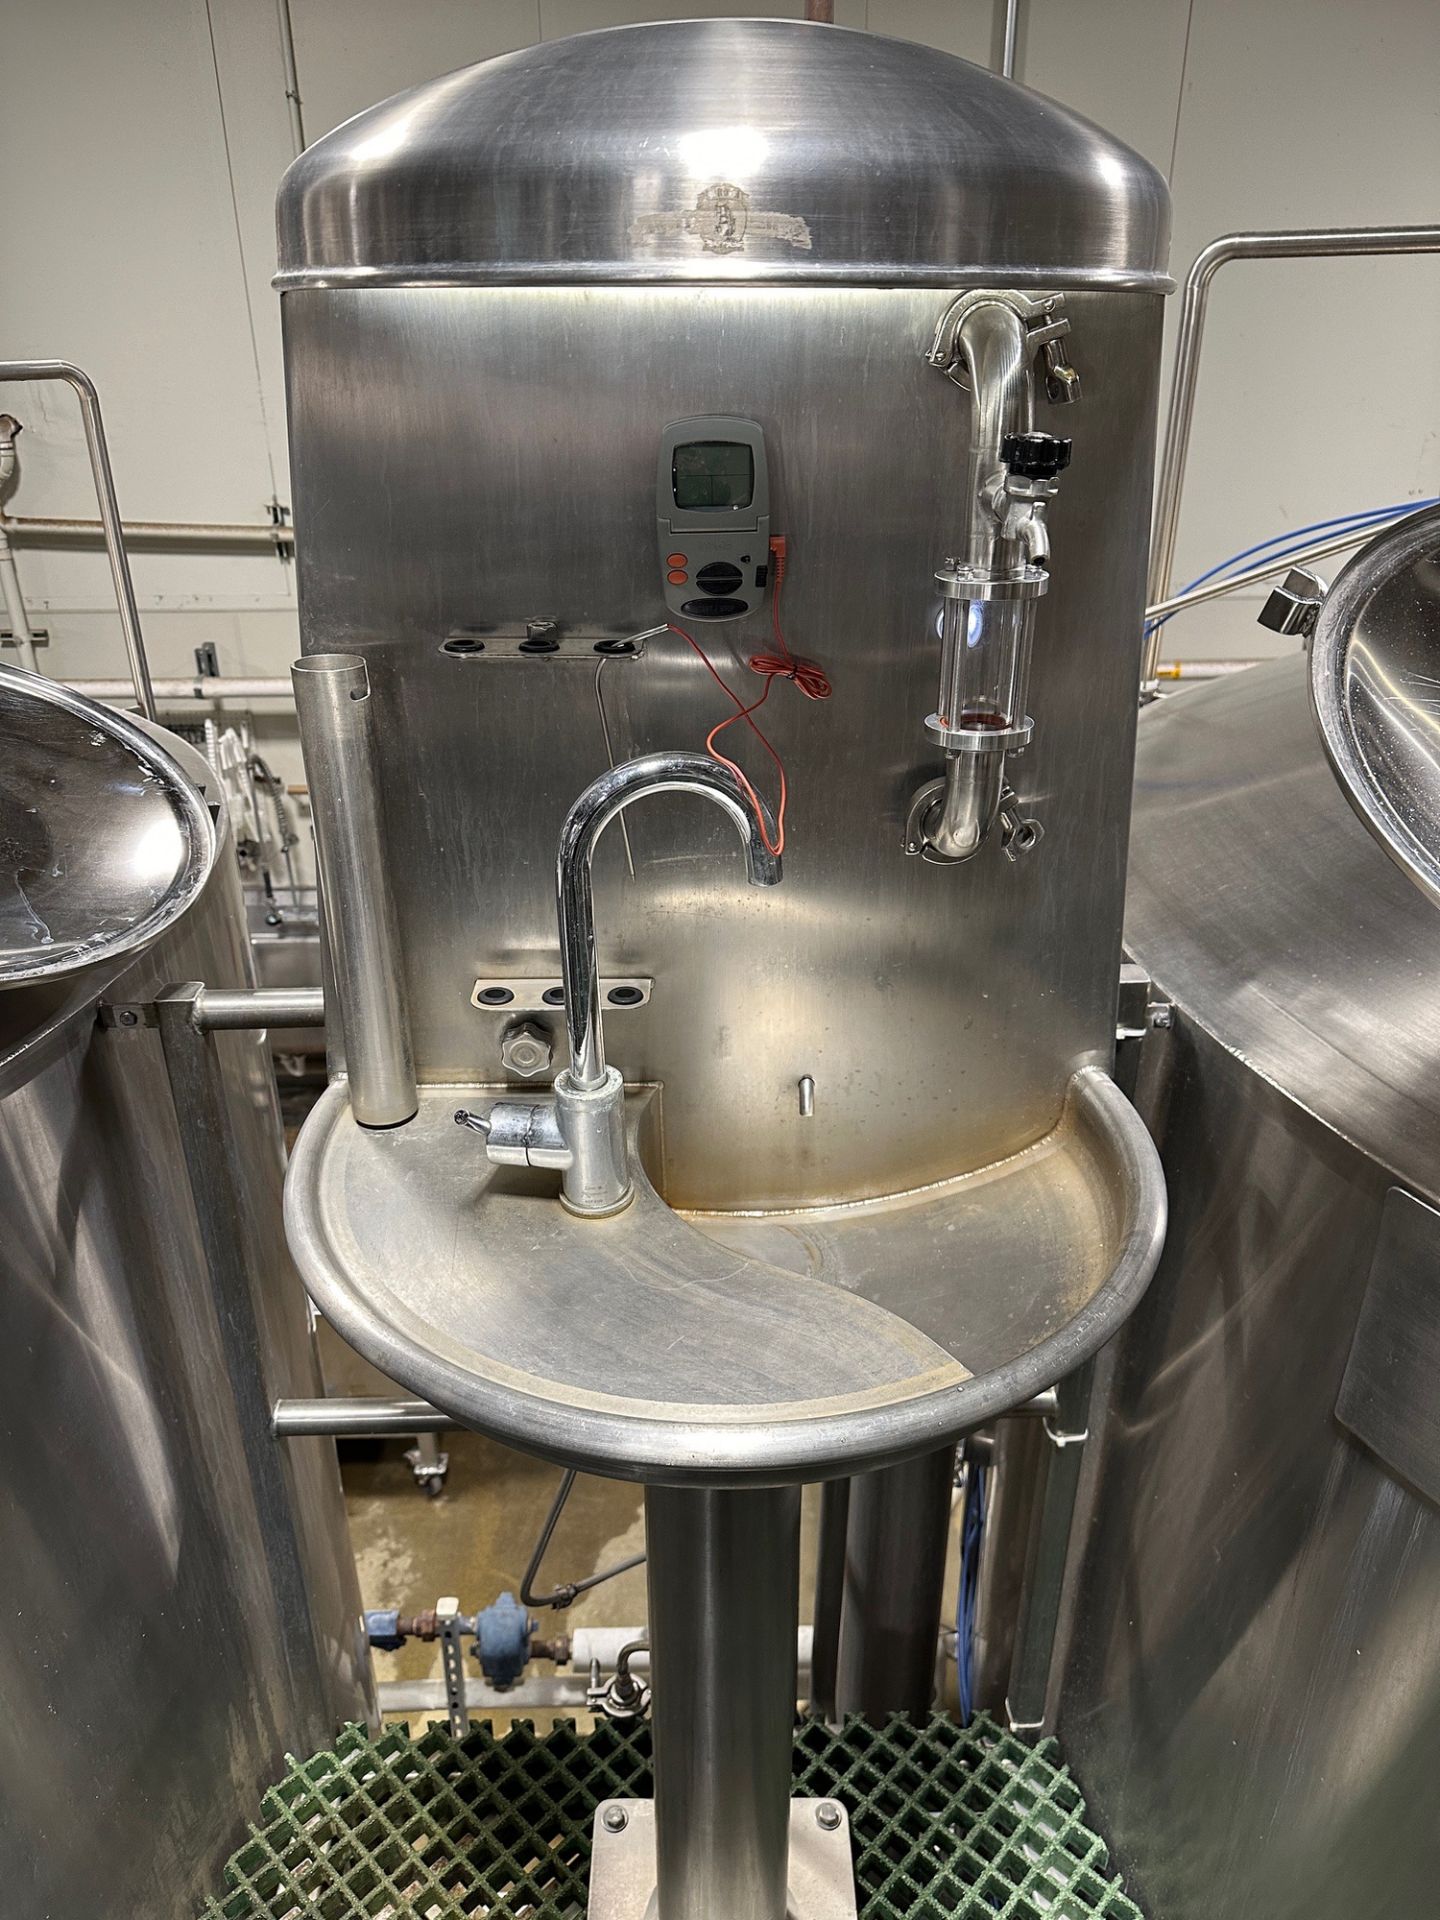 Newlands 4-Vessel 40 BBL Stainless Steel Brewhouse - Mash Mixer (Approx. 7' Diamete | Rig Fee $8500 - Image 10 of 35